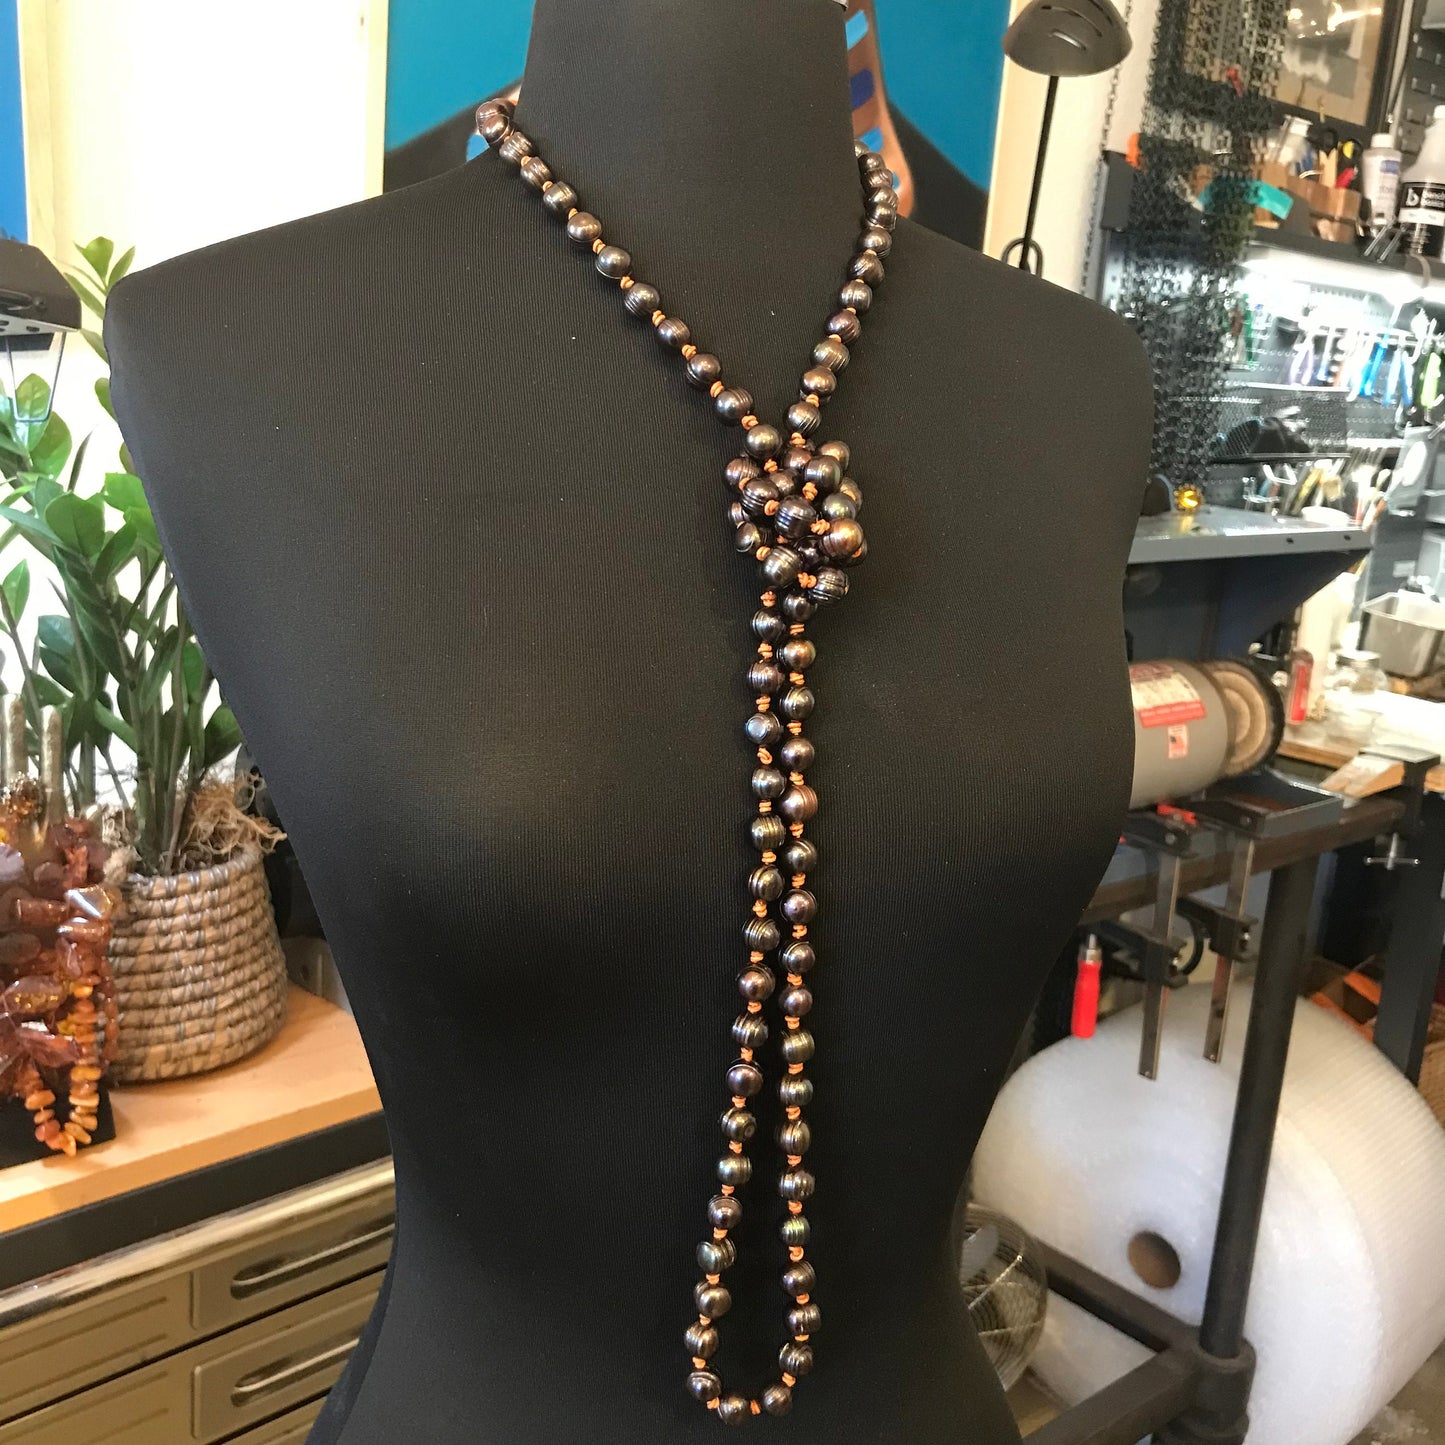 Natural cultivated pearls black long pearl leather necklace 53”